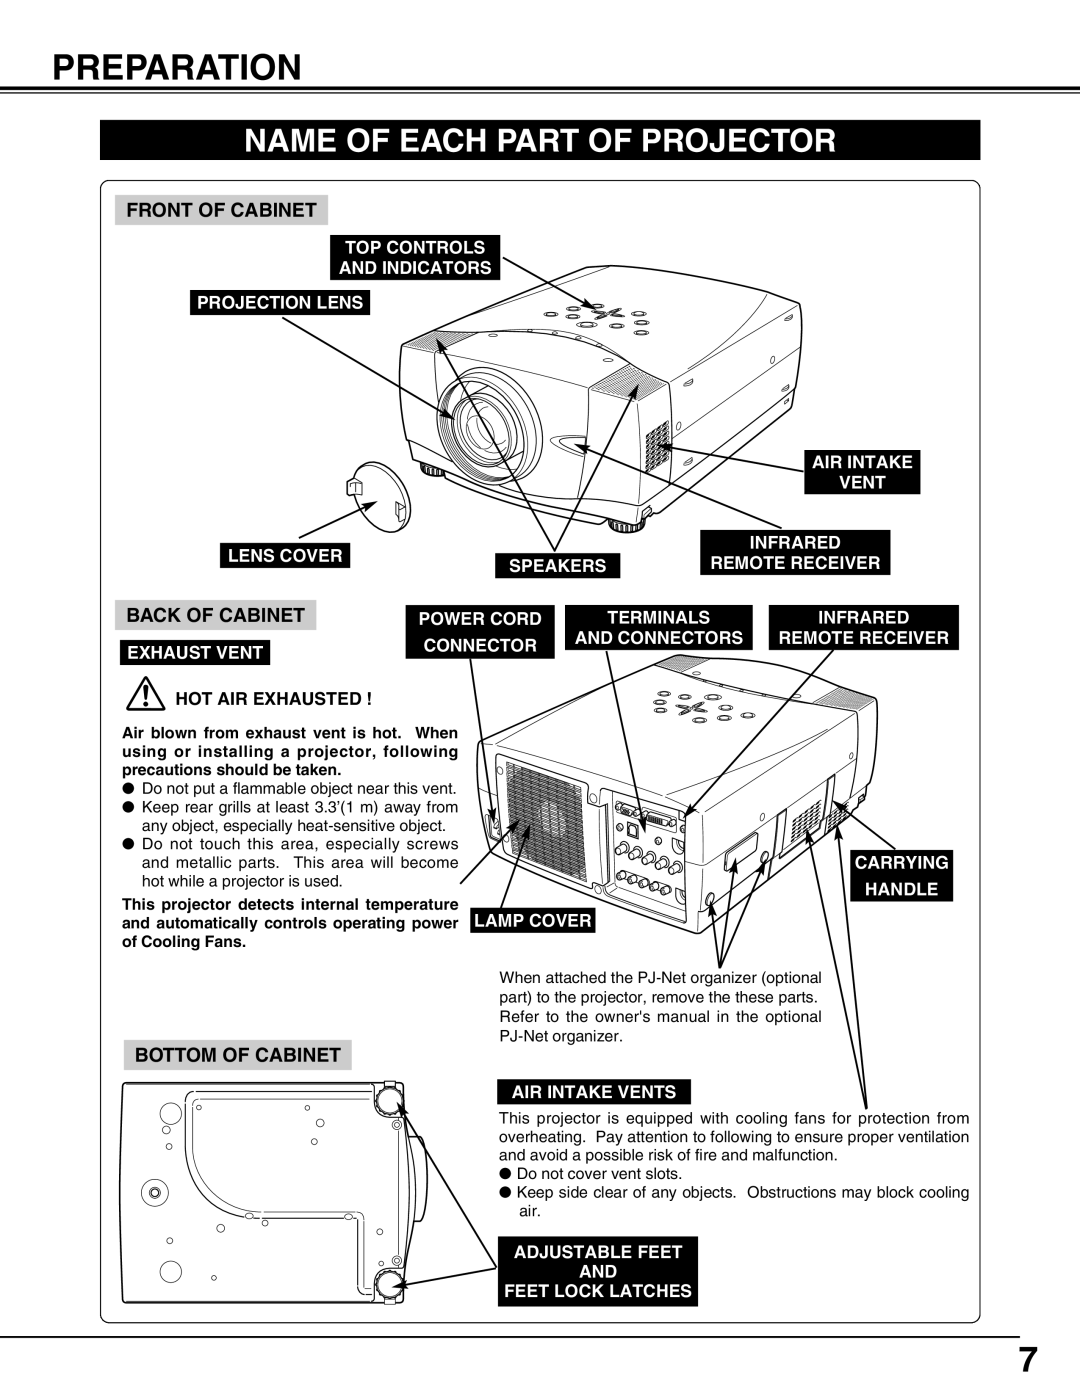 Sanyo PLC-XP50L, XP51L Preparation, Name Of Each Part Of Projector, Front Of Cabinet, Back Of Cabinet, Bottom Of Cabinet 